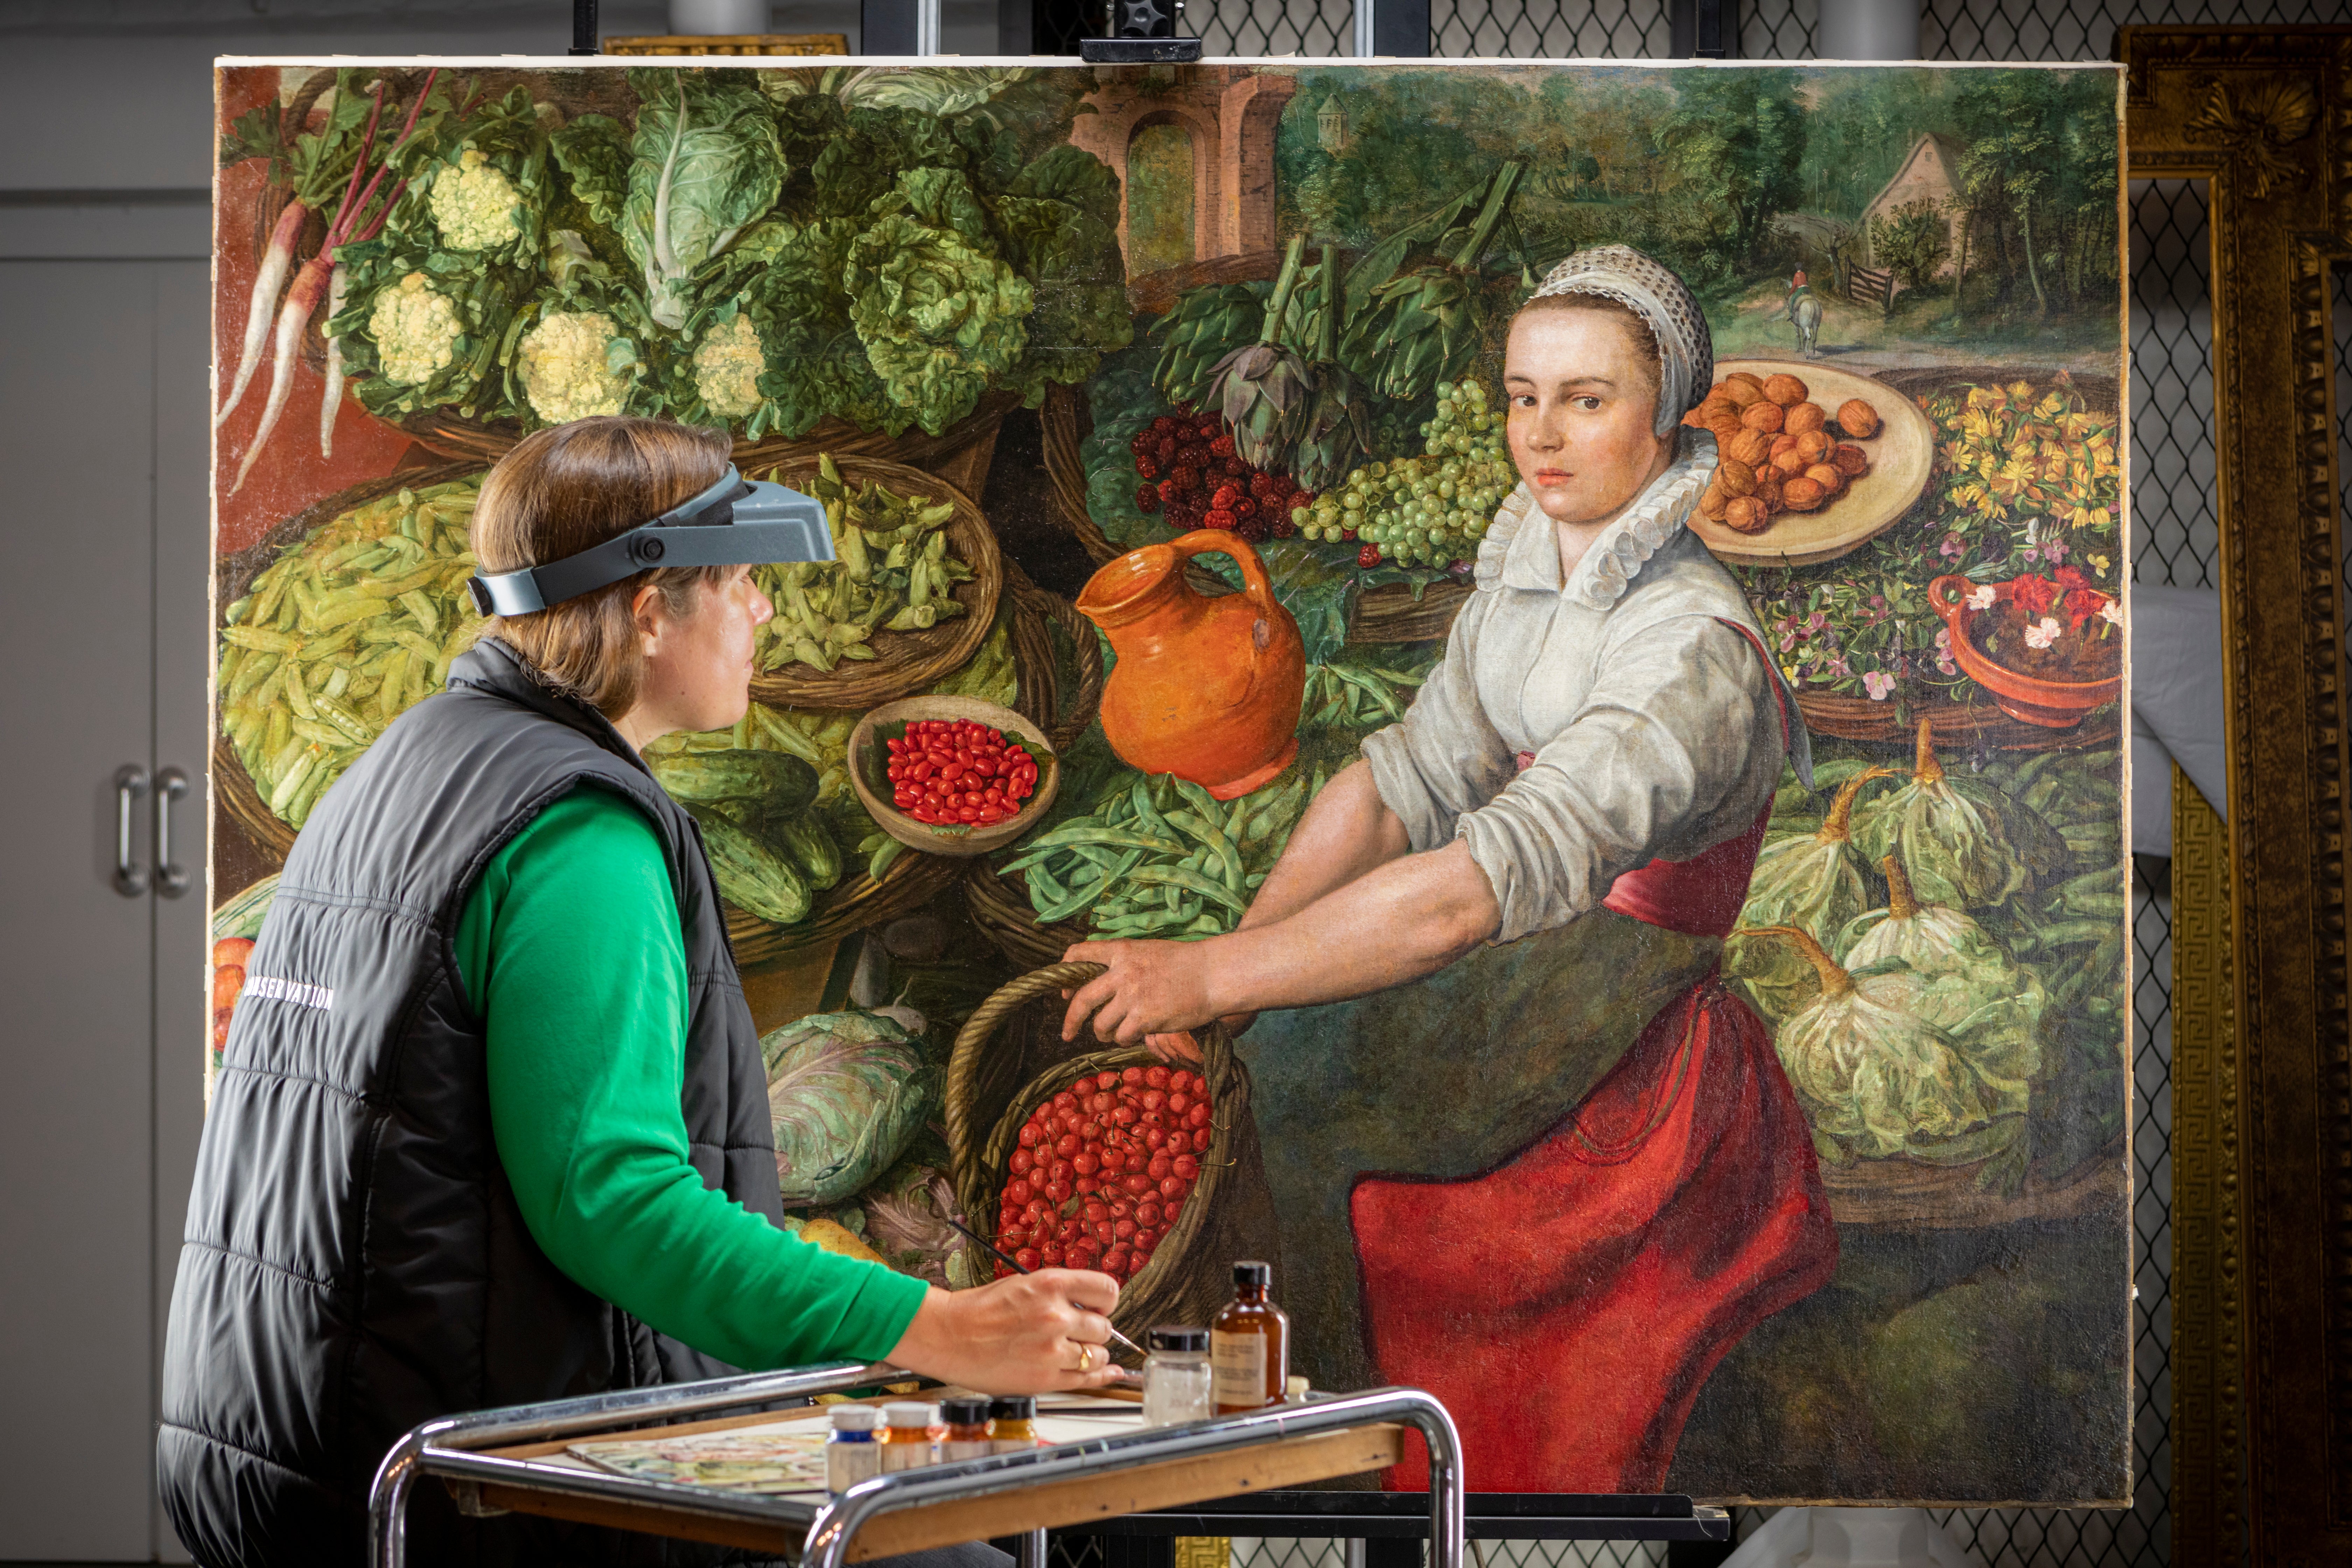 The Vegetable Seller goes on display at Audley End House